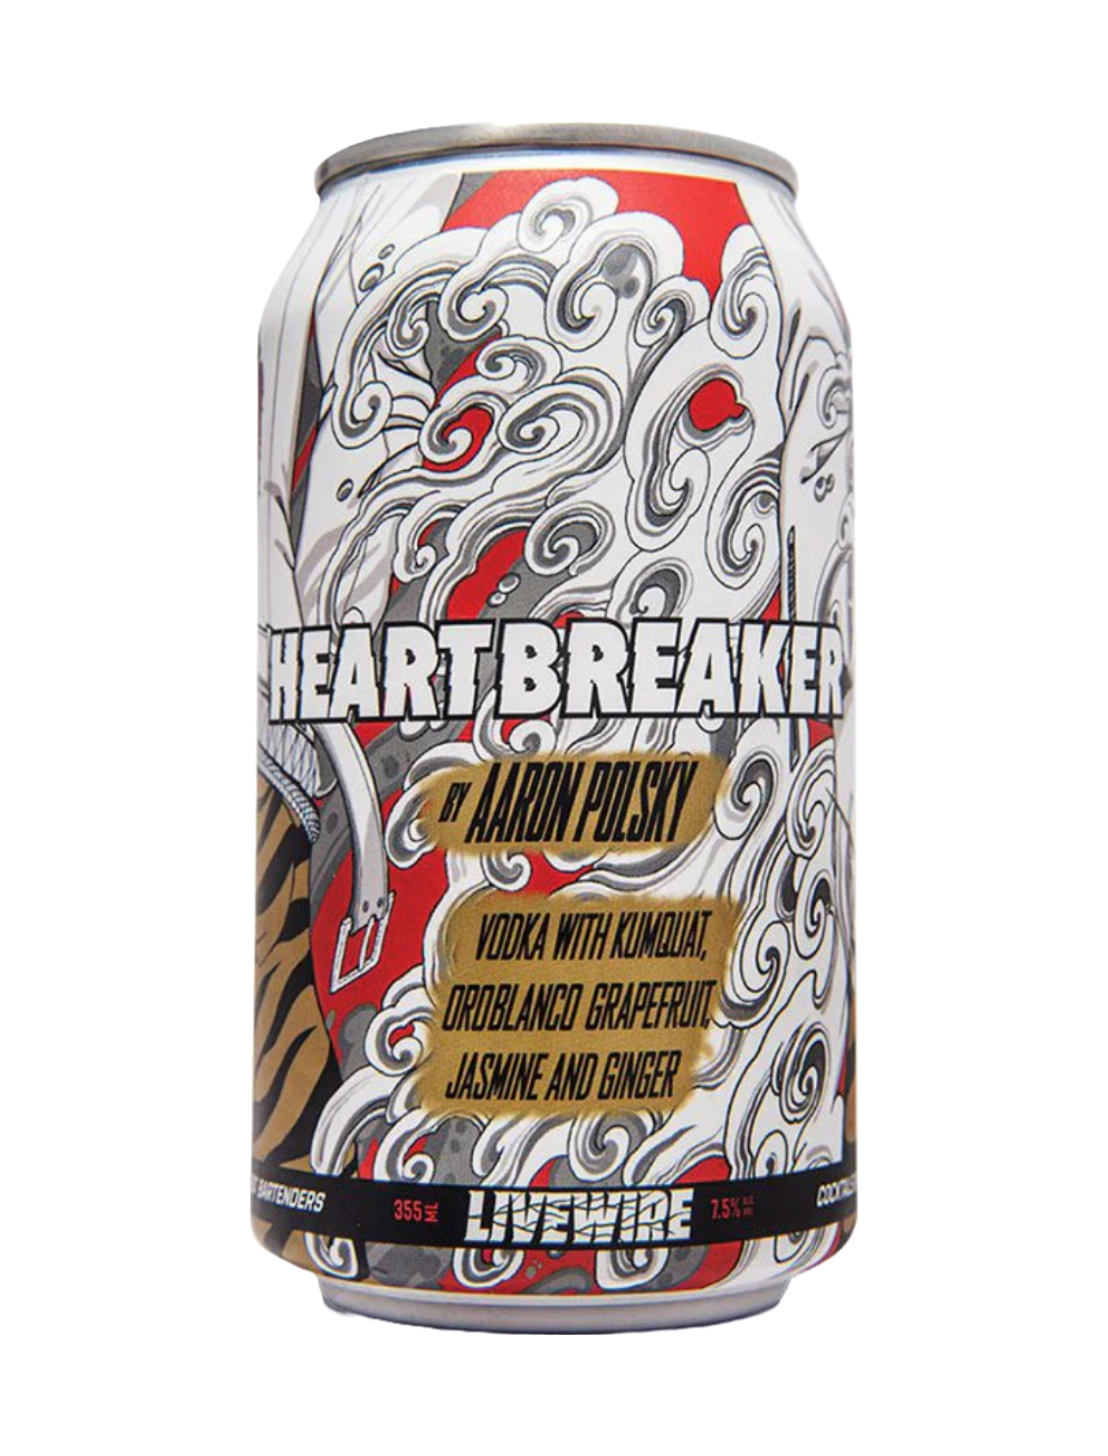 A can of LiveWire Heartbreaker Canned Cocktail in front of a plain white background